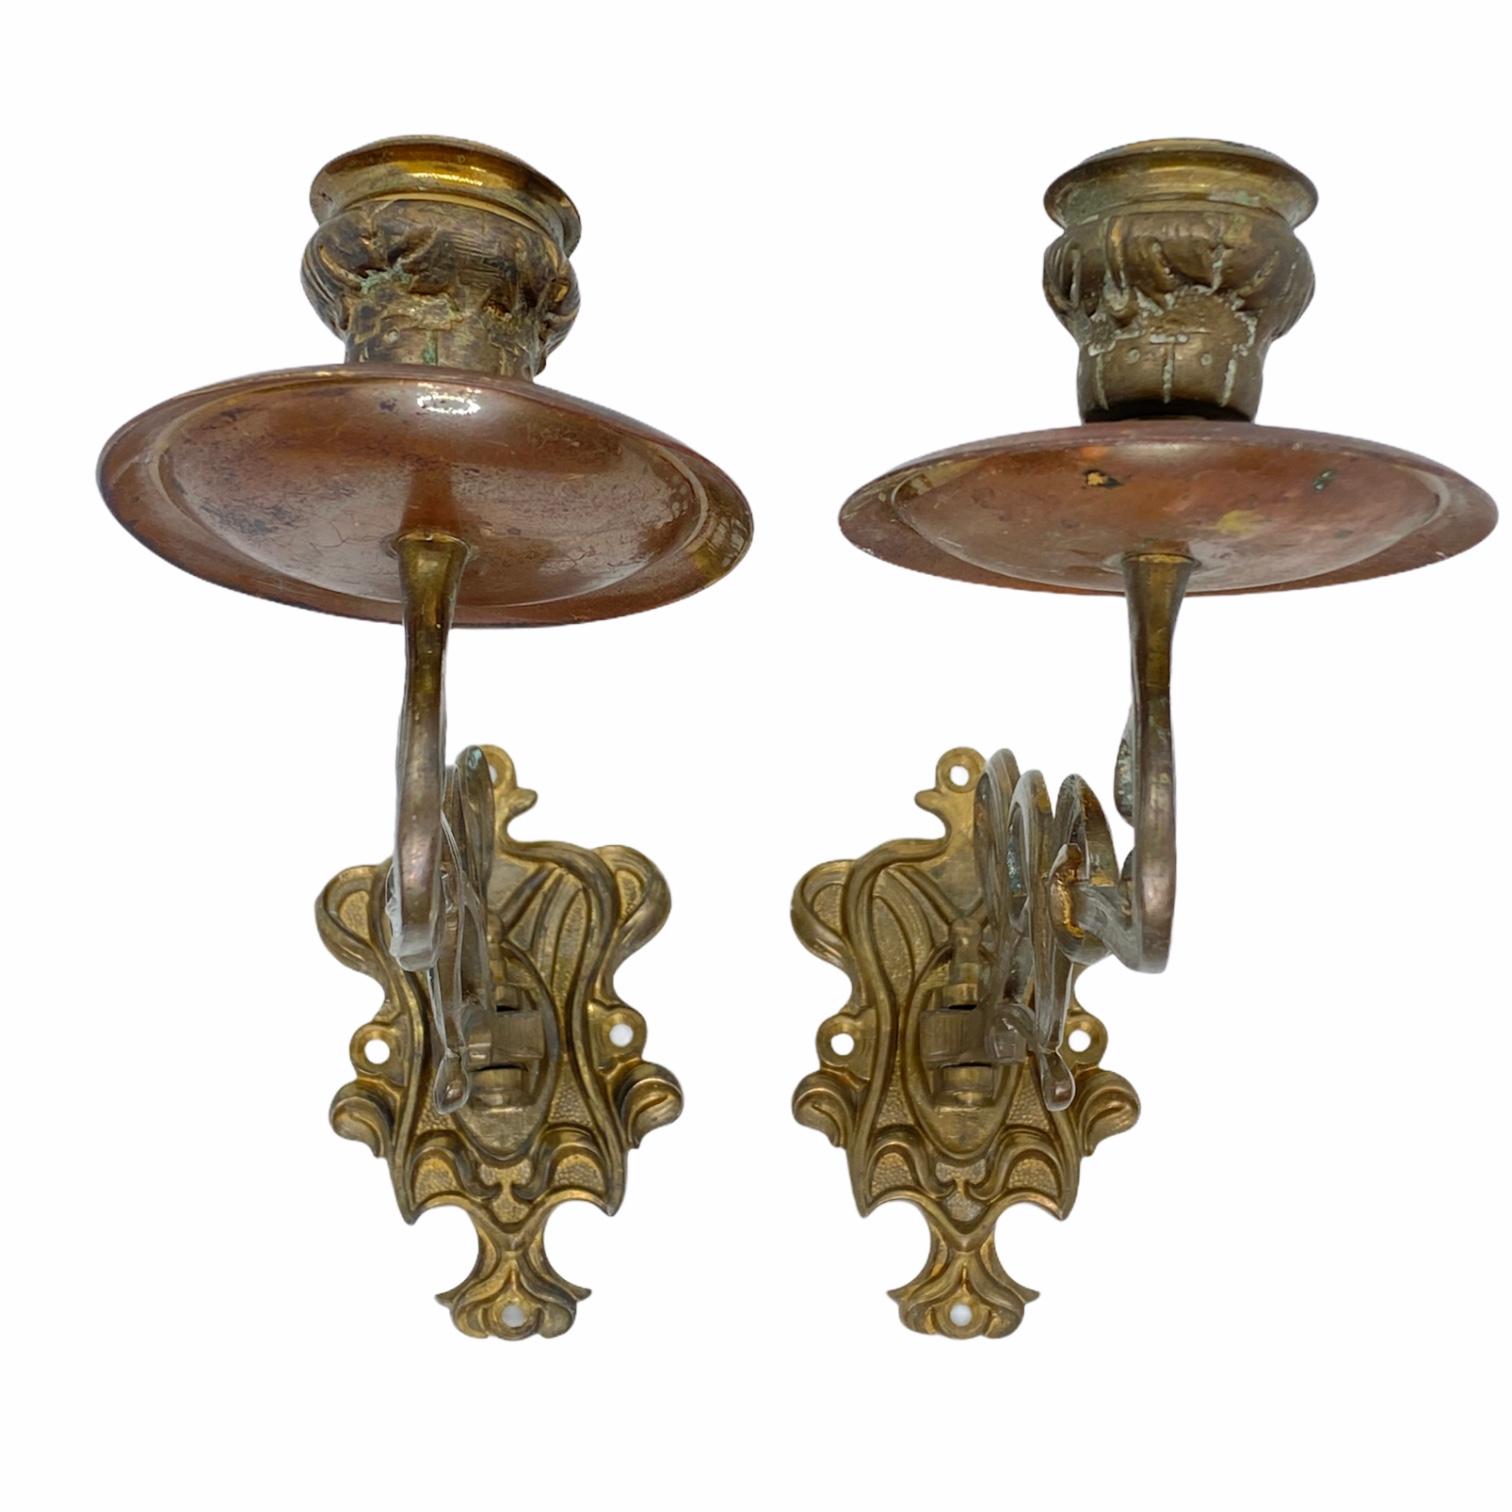 This is a 1890s pair of arm candle piano or wall sconces. Nice patina to the metal and an all original condition.